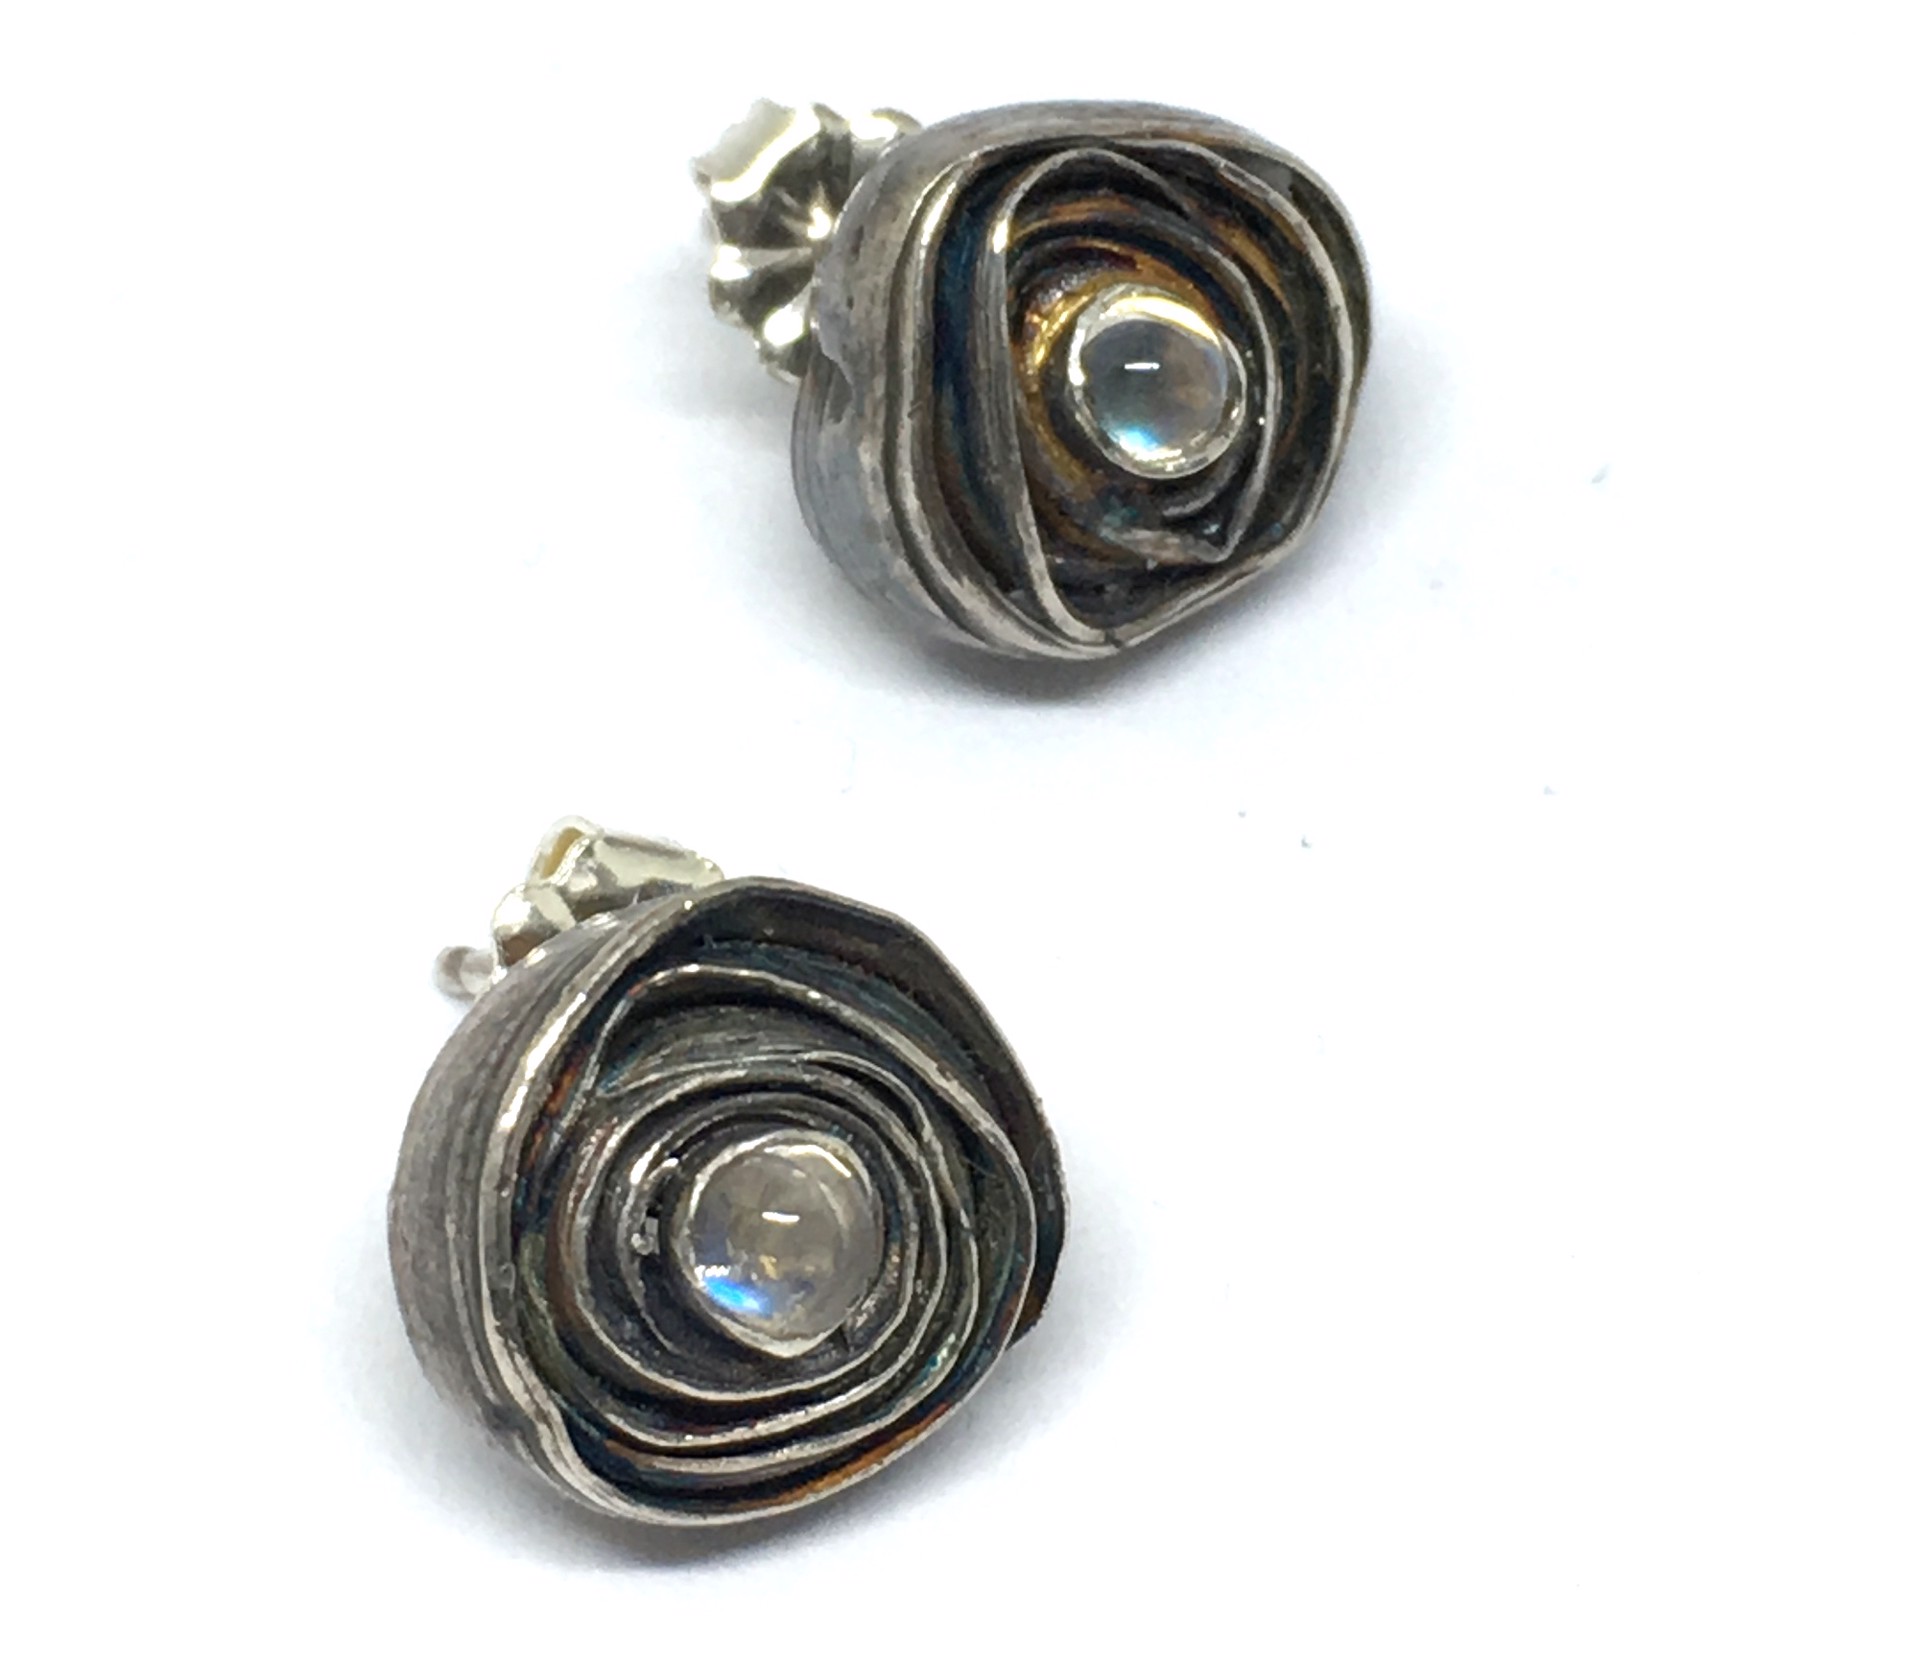 Mitsuro Hikime Rose Post Earrings in Sterling Silver with Moonstone Gemstones by Melicia Phillips